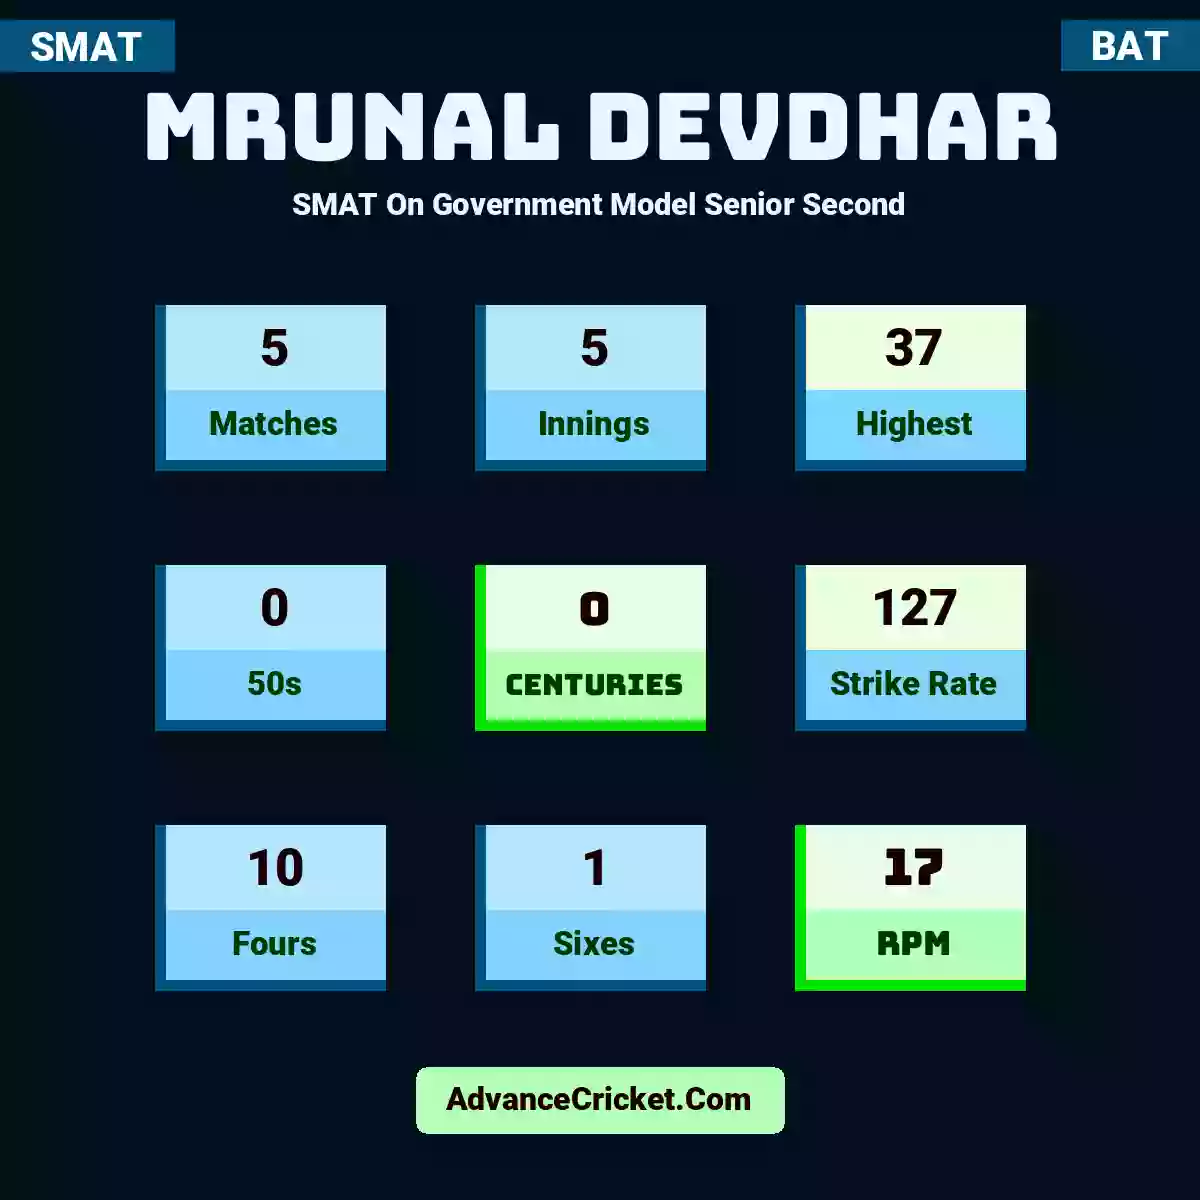 Mrunal Devdhar SMAT  On Government Model Senior Second, Mrunal Devdhar played 5 matches, scored 37 runs as highest, 0 half-centuries, and 0 centuries, with a strike rate of 127. M.Devdhar hit 10 fours and 1 sixes, with an RPM of 17.